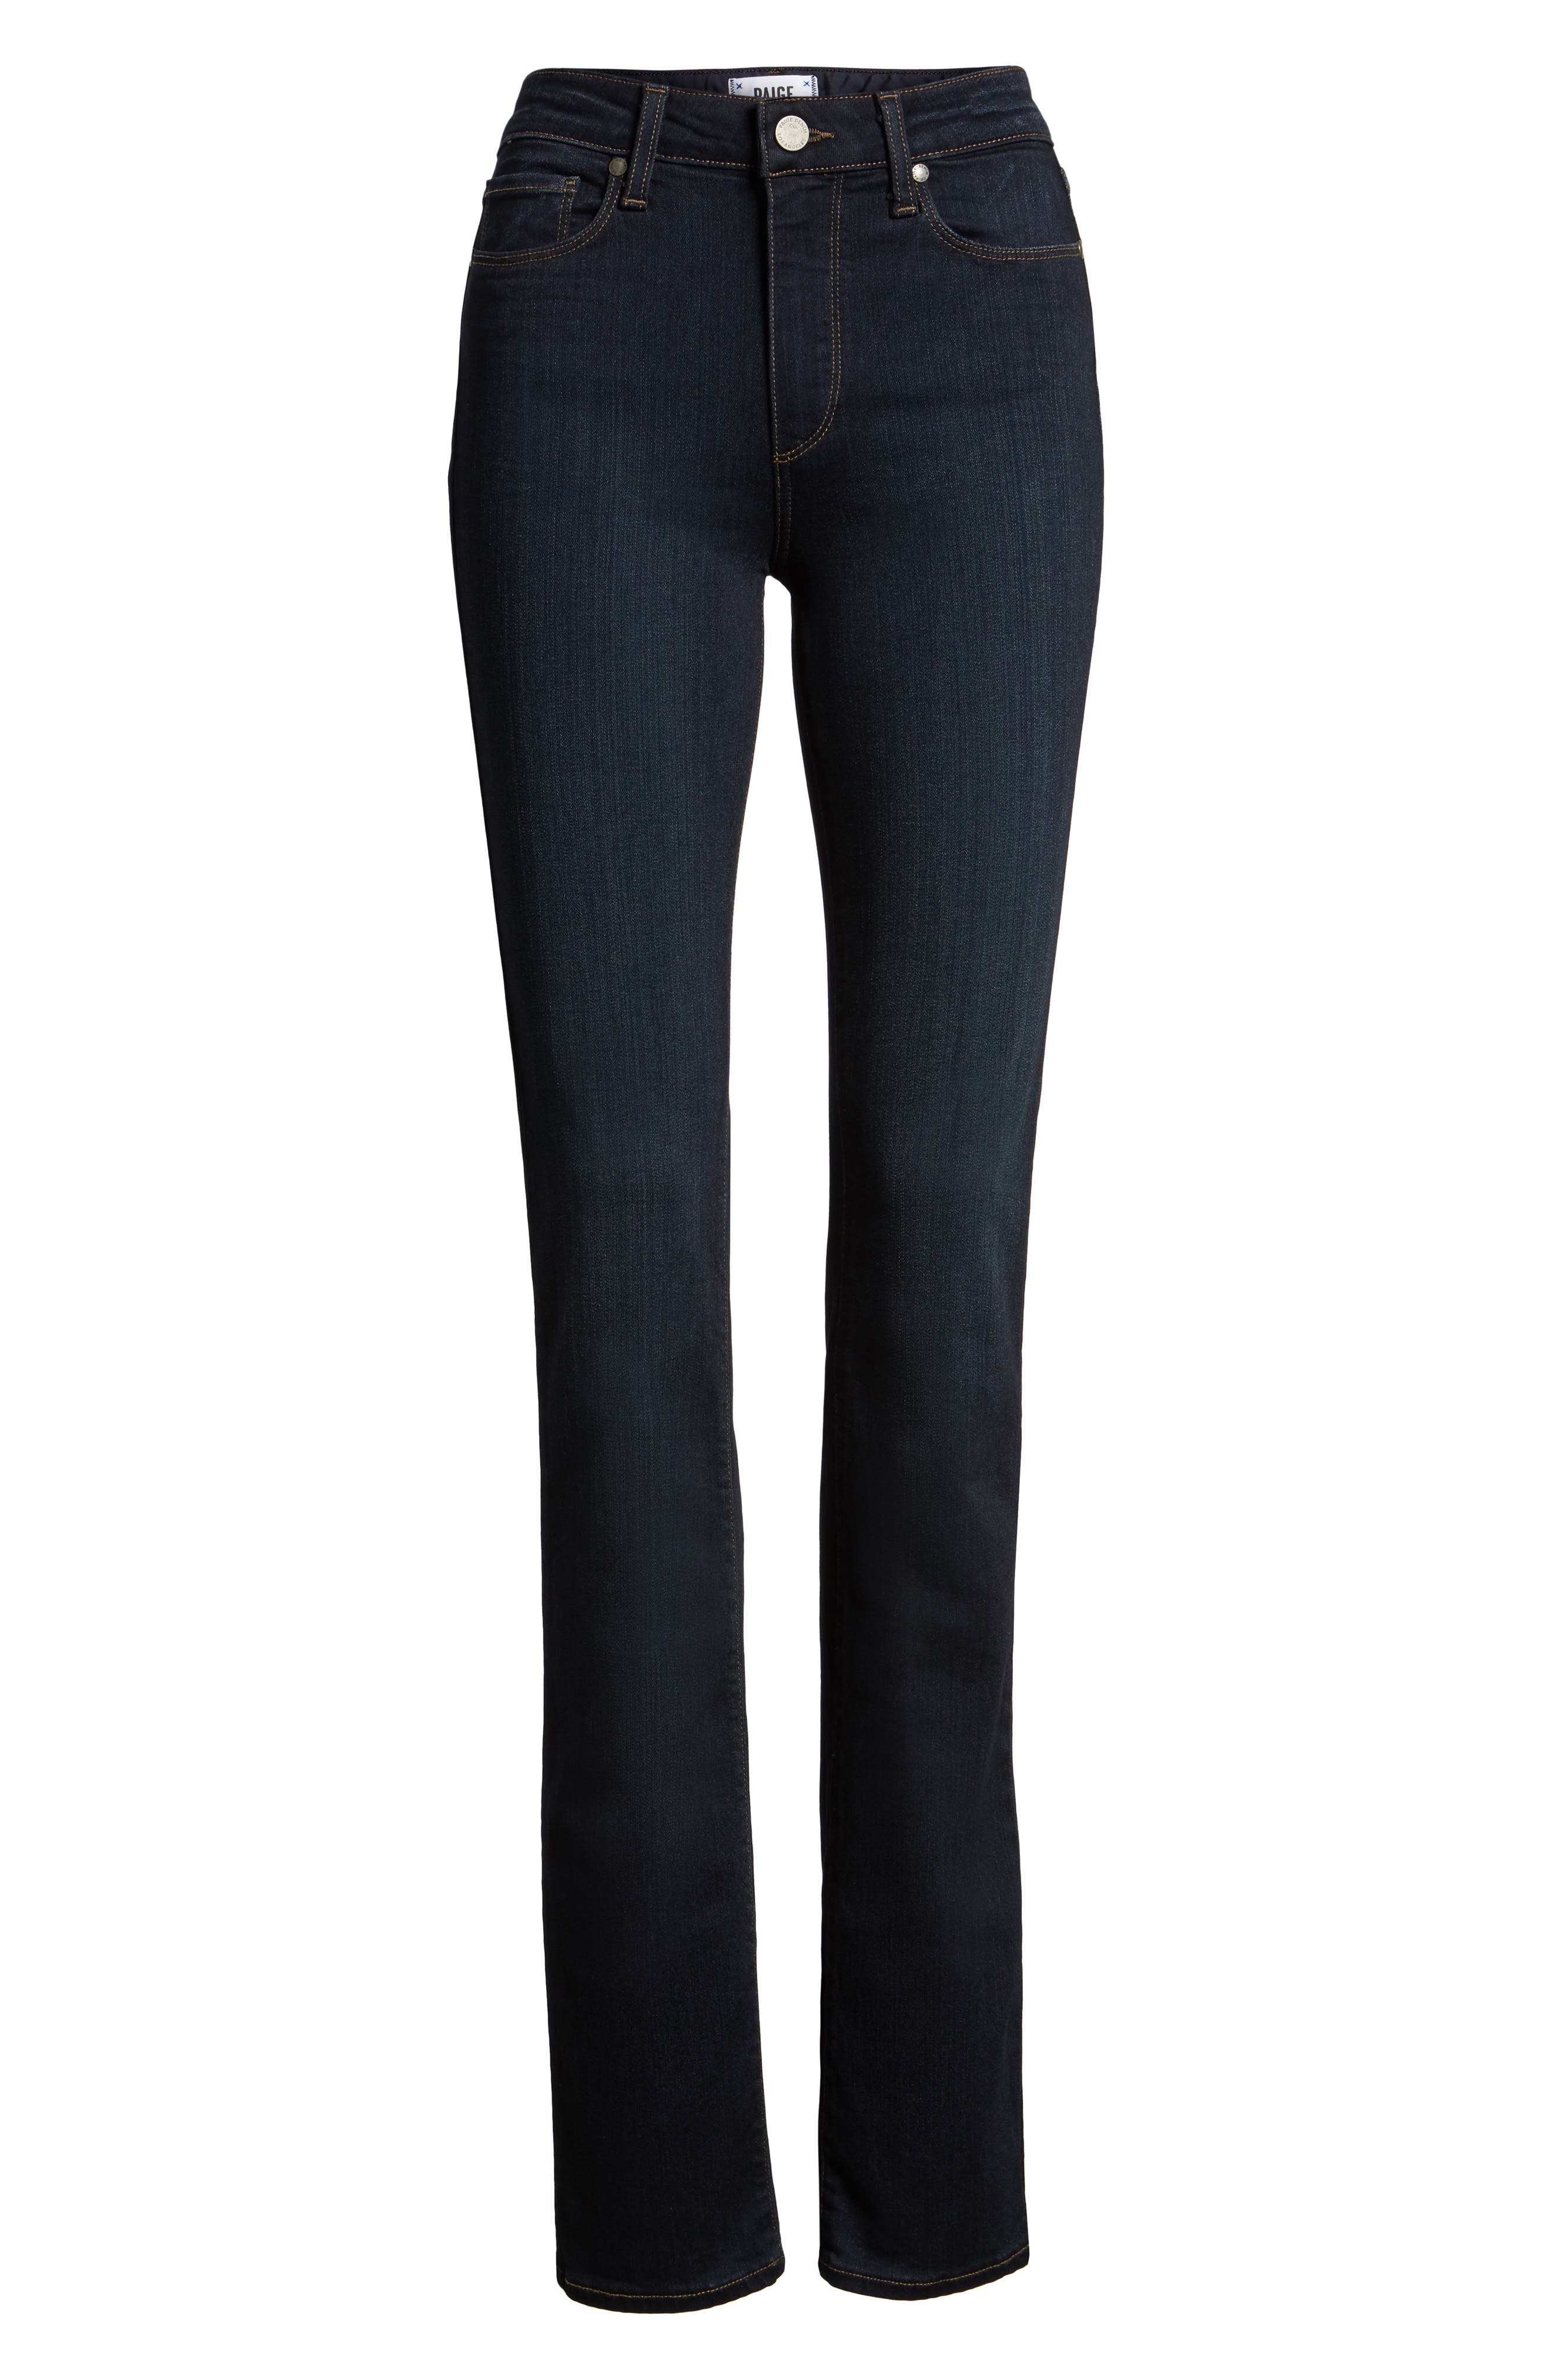 paige jeans hoxton straight